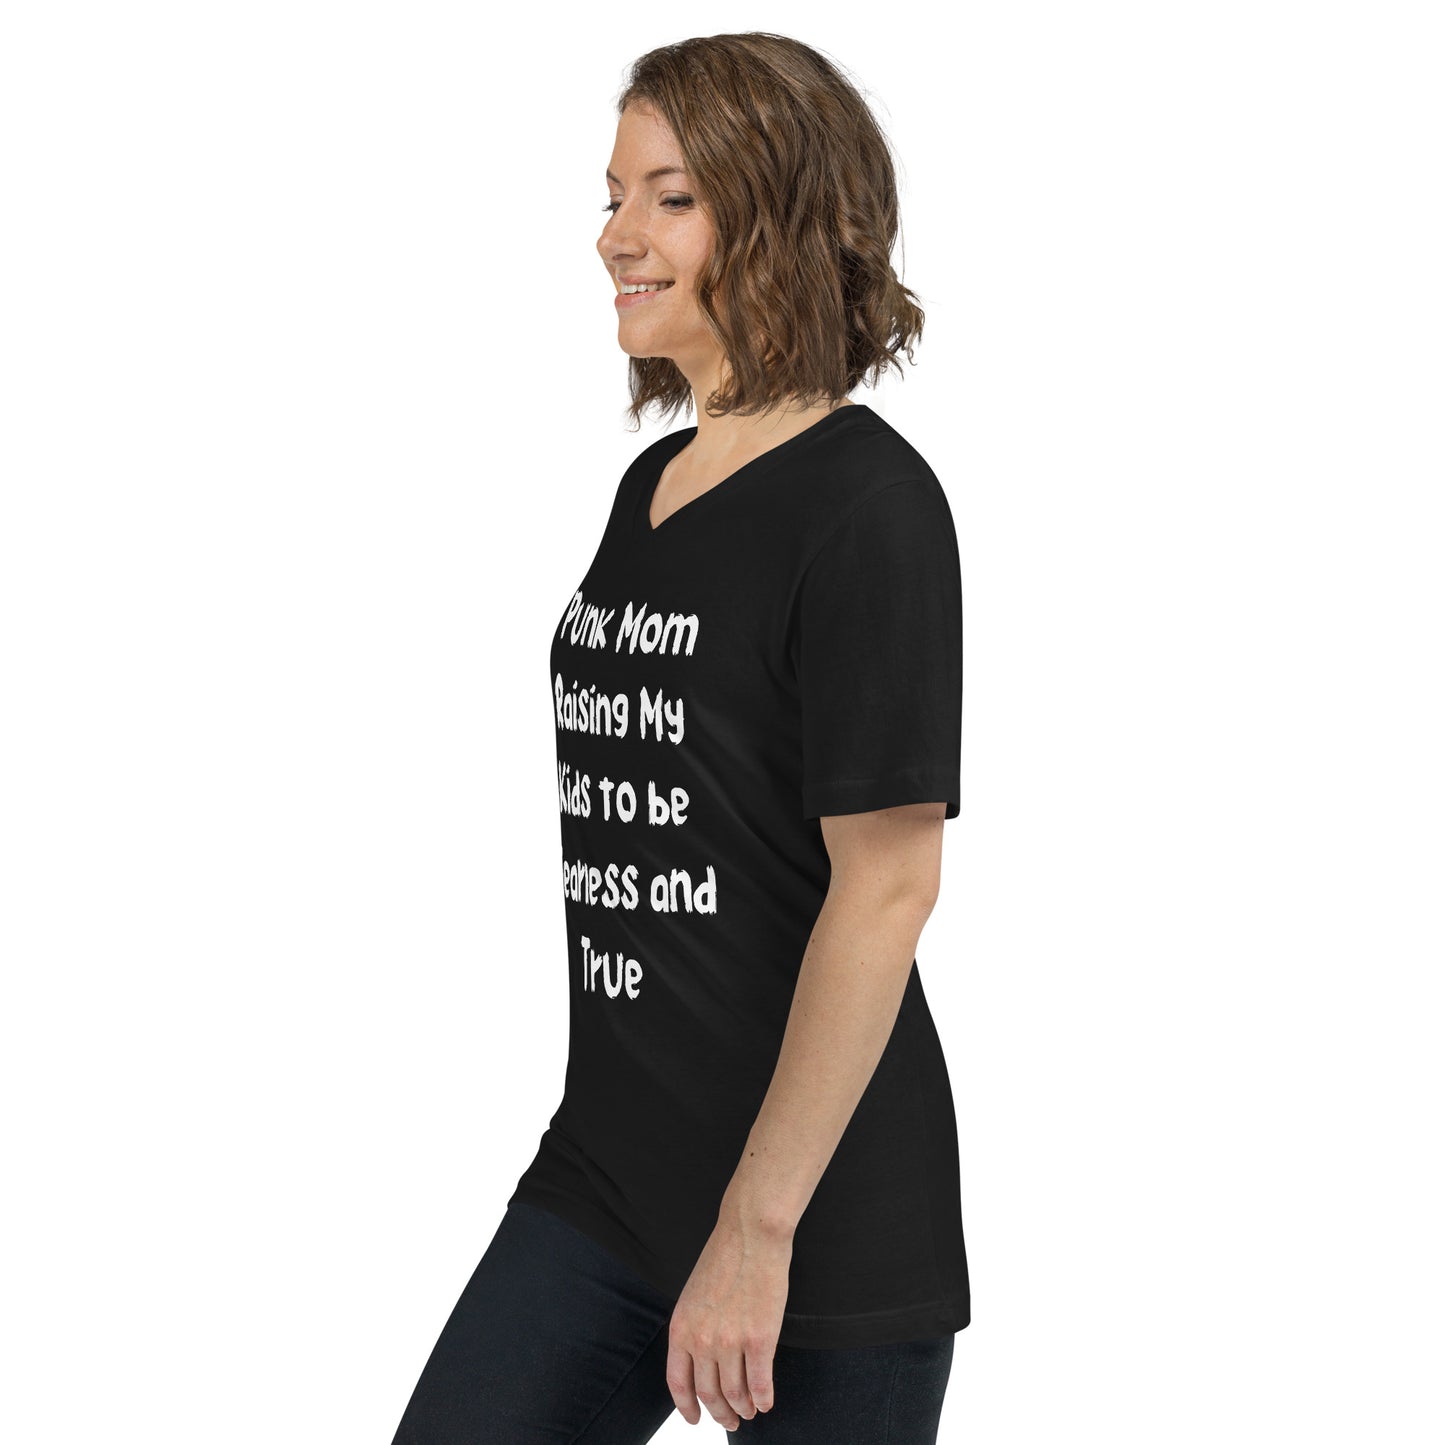 Fearless and True T-Shirt